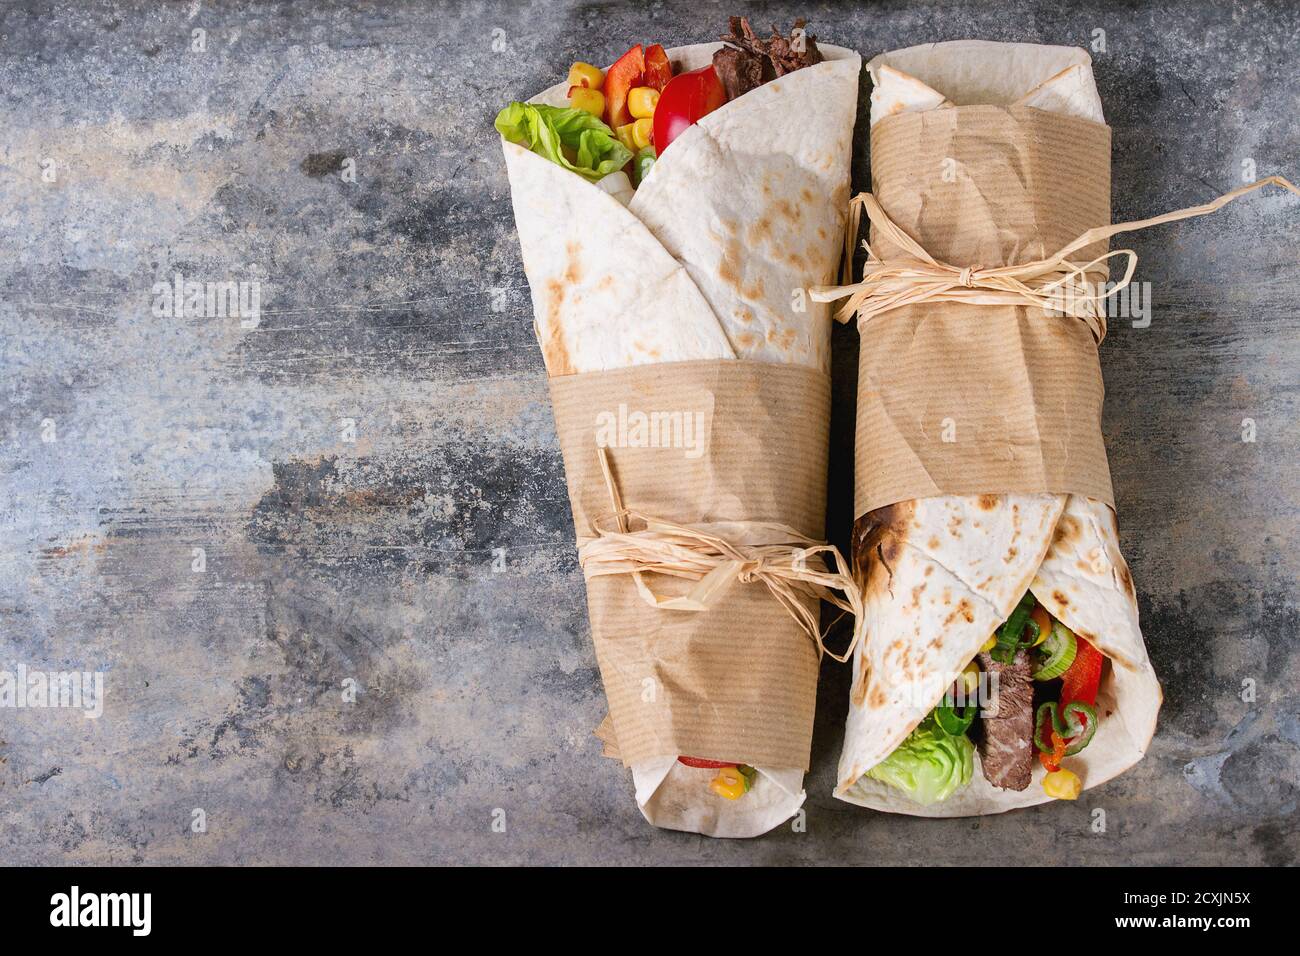 Mexican style dinner. Two papered tortillas burrito with beef and vegetables over old textured tin background. Flat lay with copy space Stock Photo